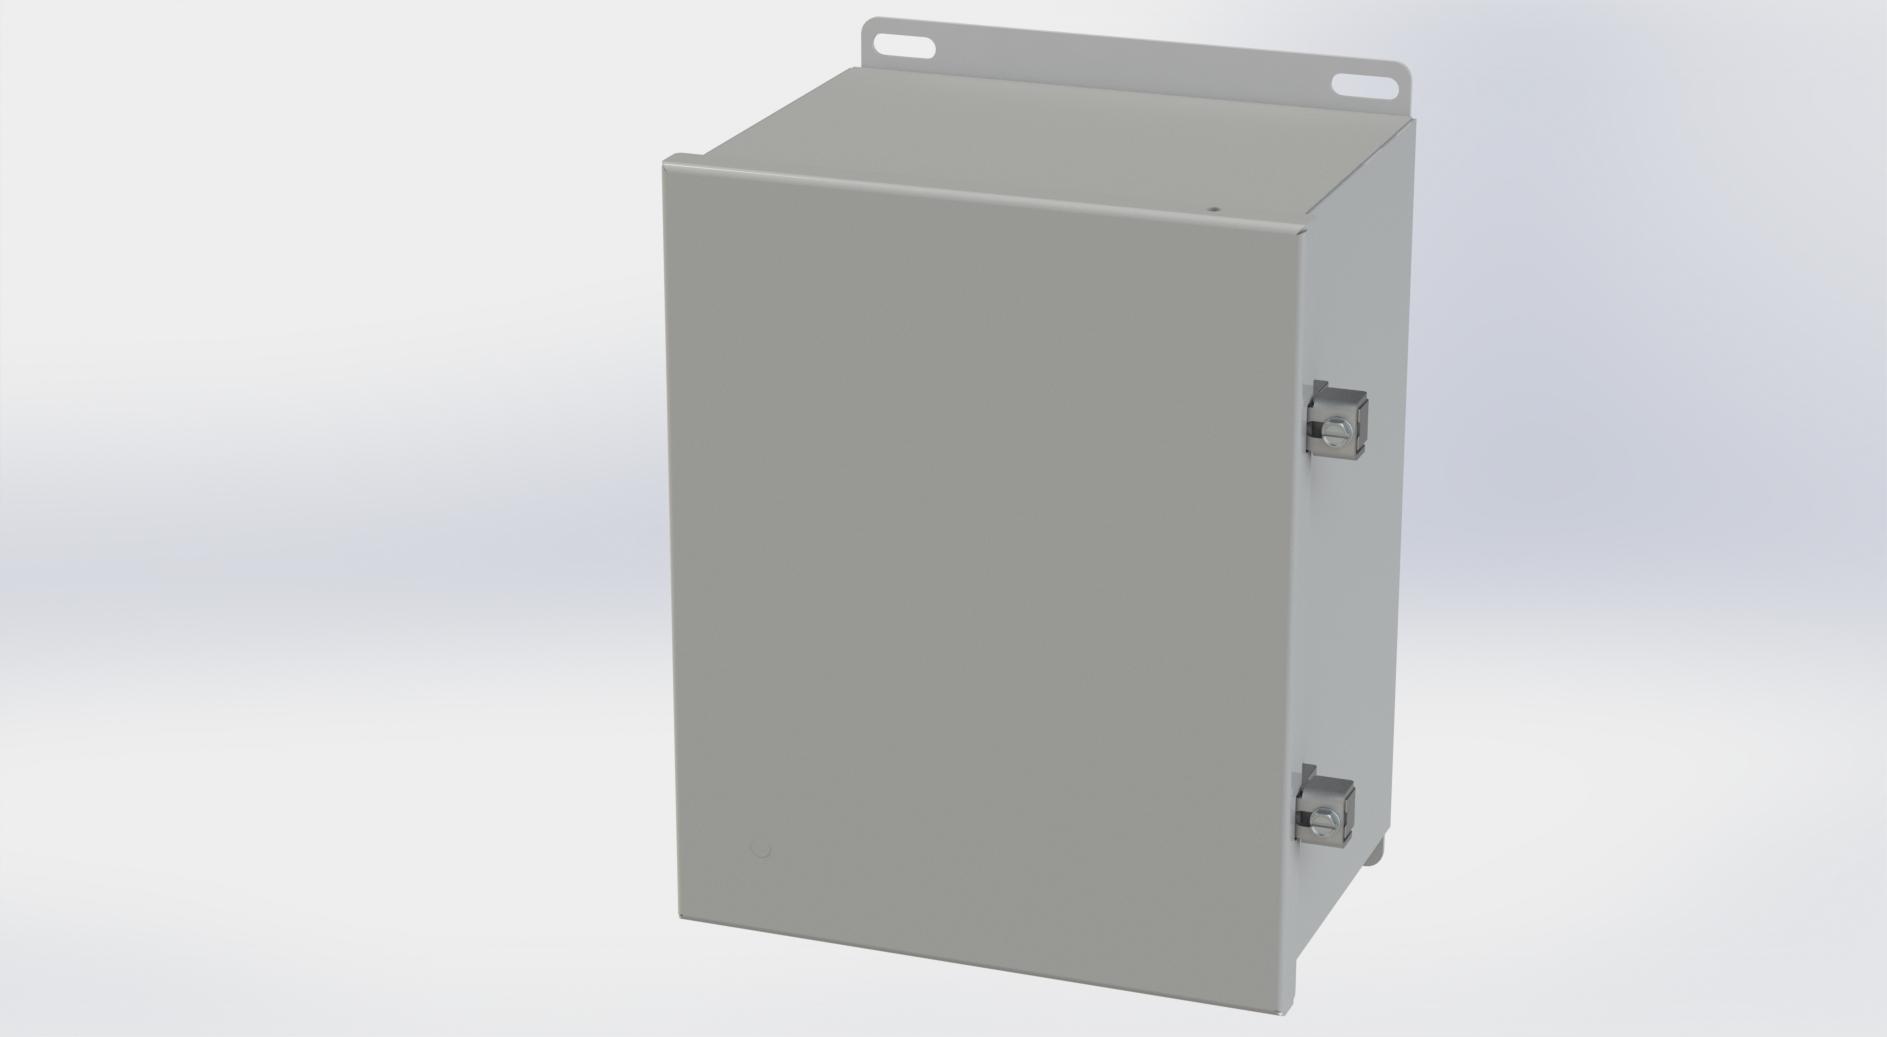 Saginaw Control SCE-10086CHNF CHNF Enclosure, Height:10.13", Width:8.00", Depth:6.00", ANSI-61 gray powder coating inside and out. Optional sub-panels are powder coated white.